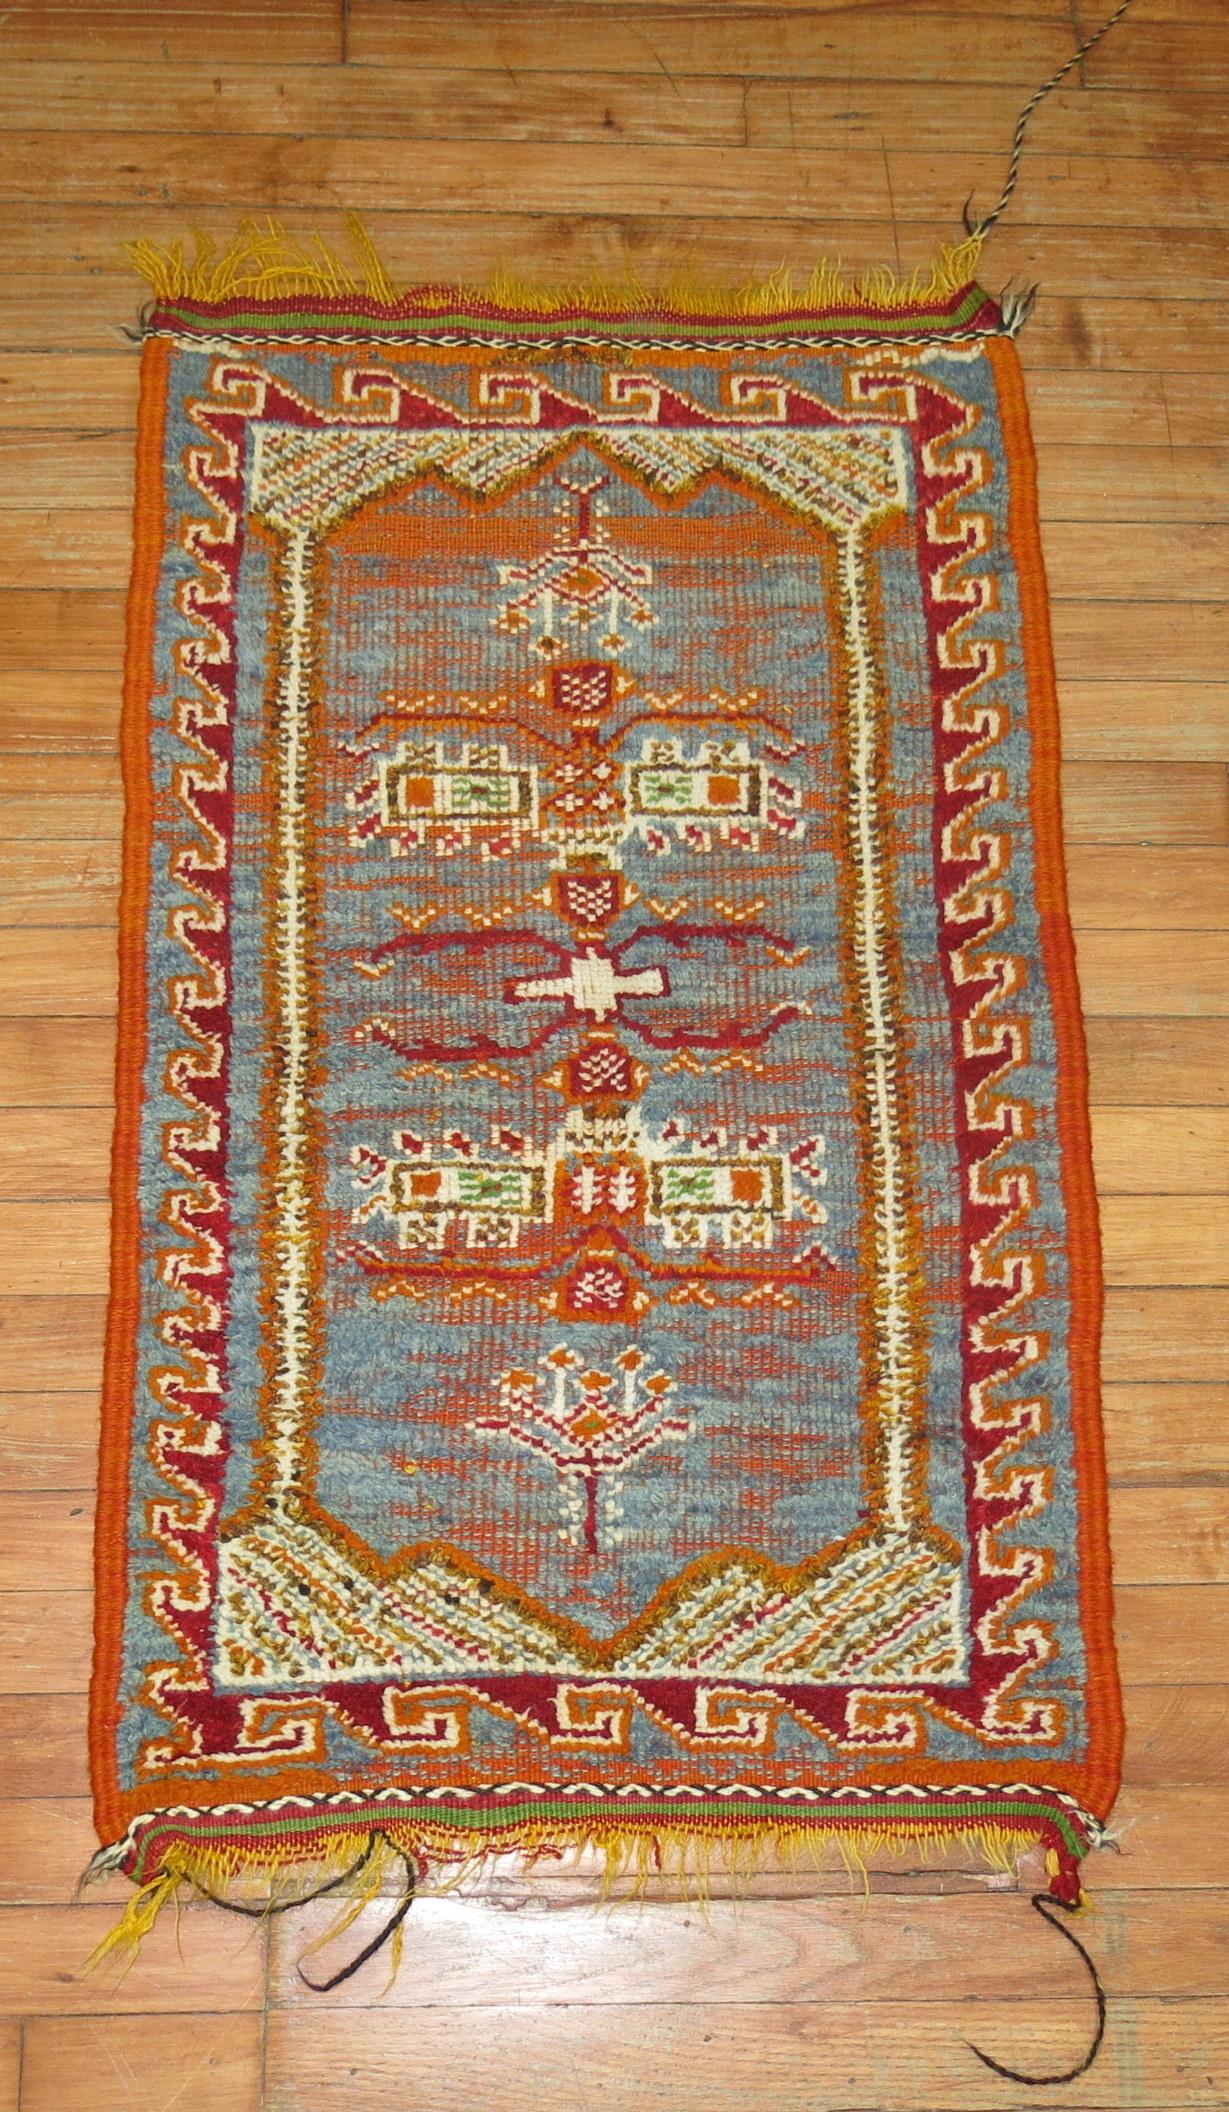 Odd size one of a kind blue and orange vintage Moroccan mini size rug

Measures: 2' x 3'4''.